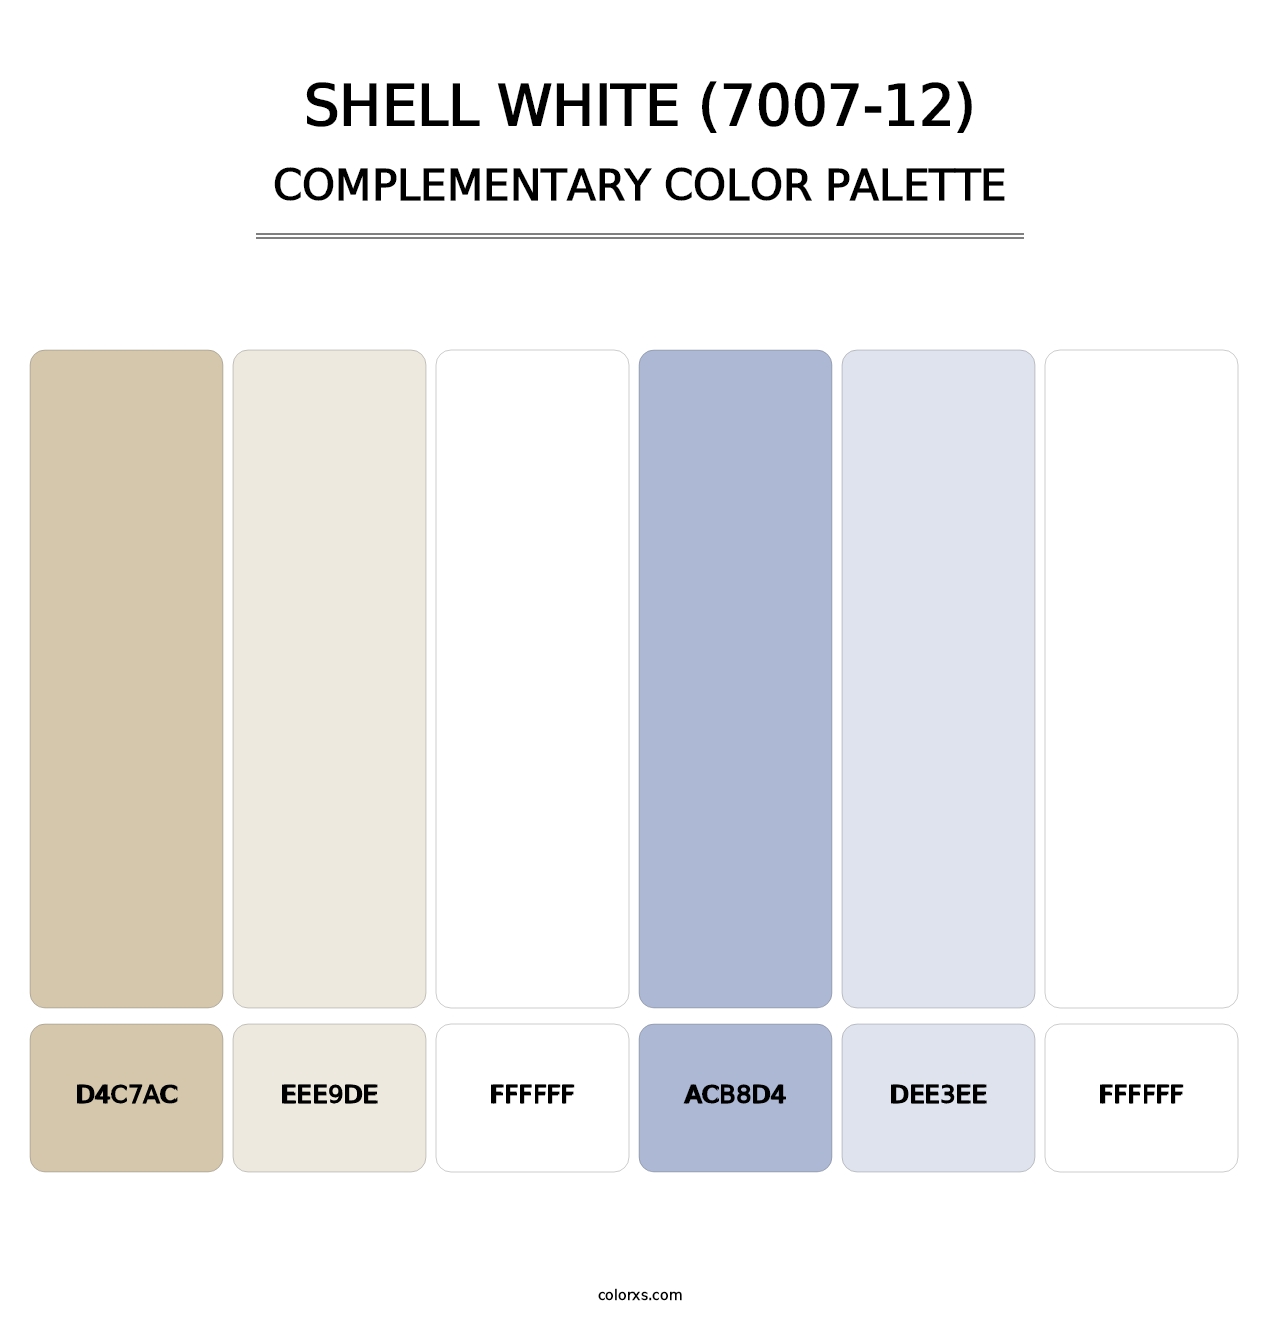 Shell White (7007-12) - Complementary Color Palette